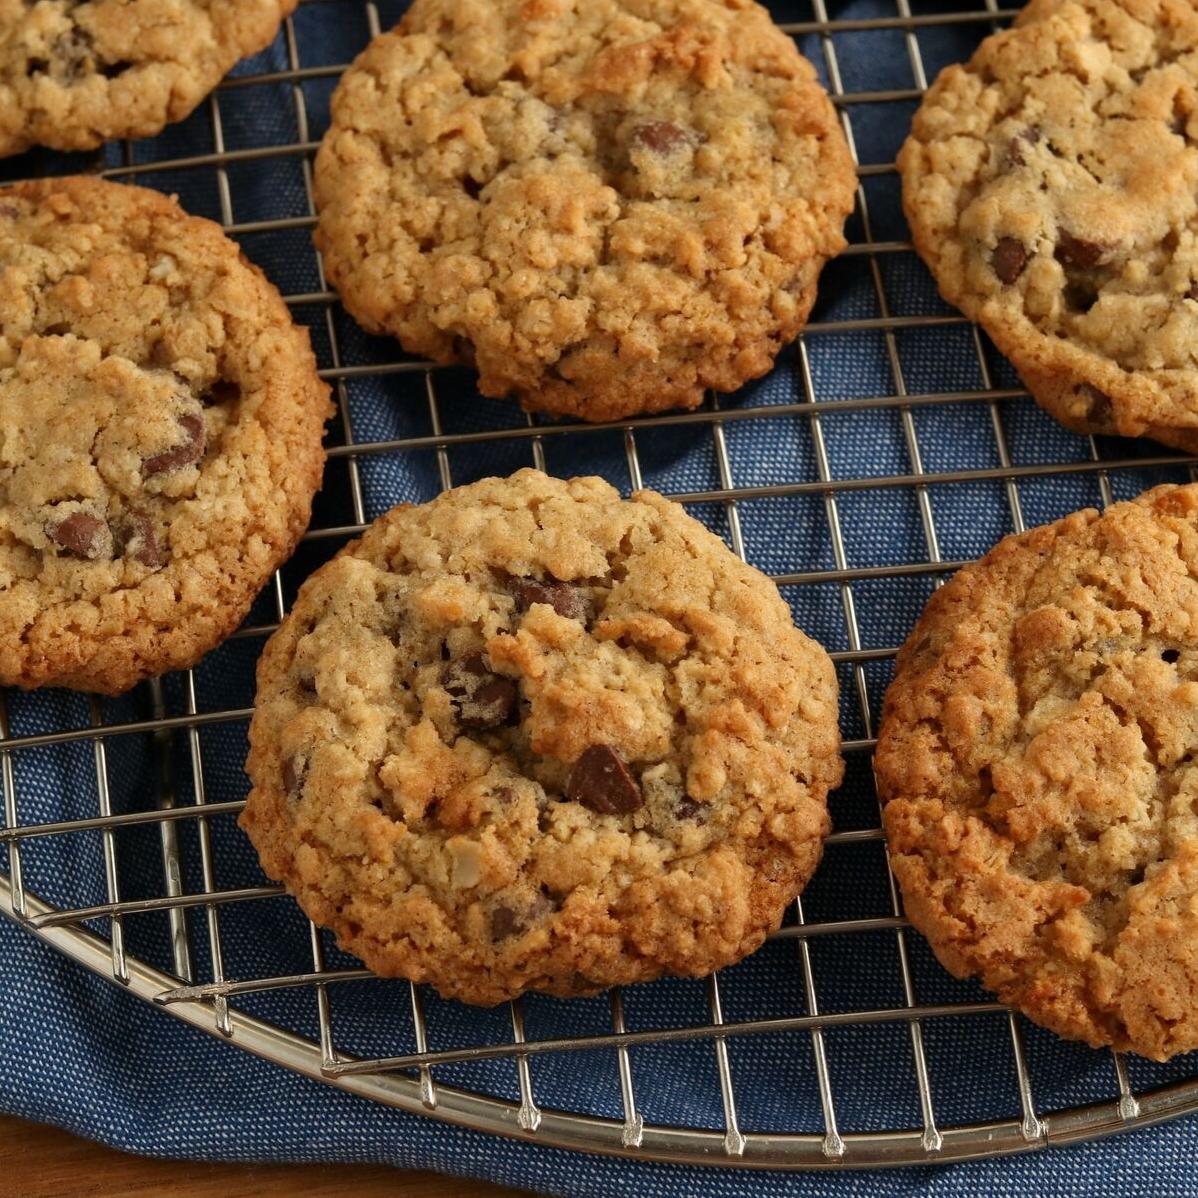  Take a bite of our soft and chewy oatmeal cookies for a warm, comforting flavor.